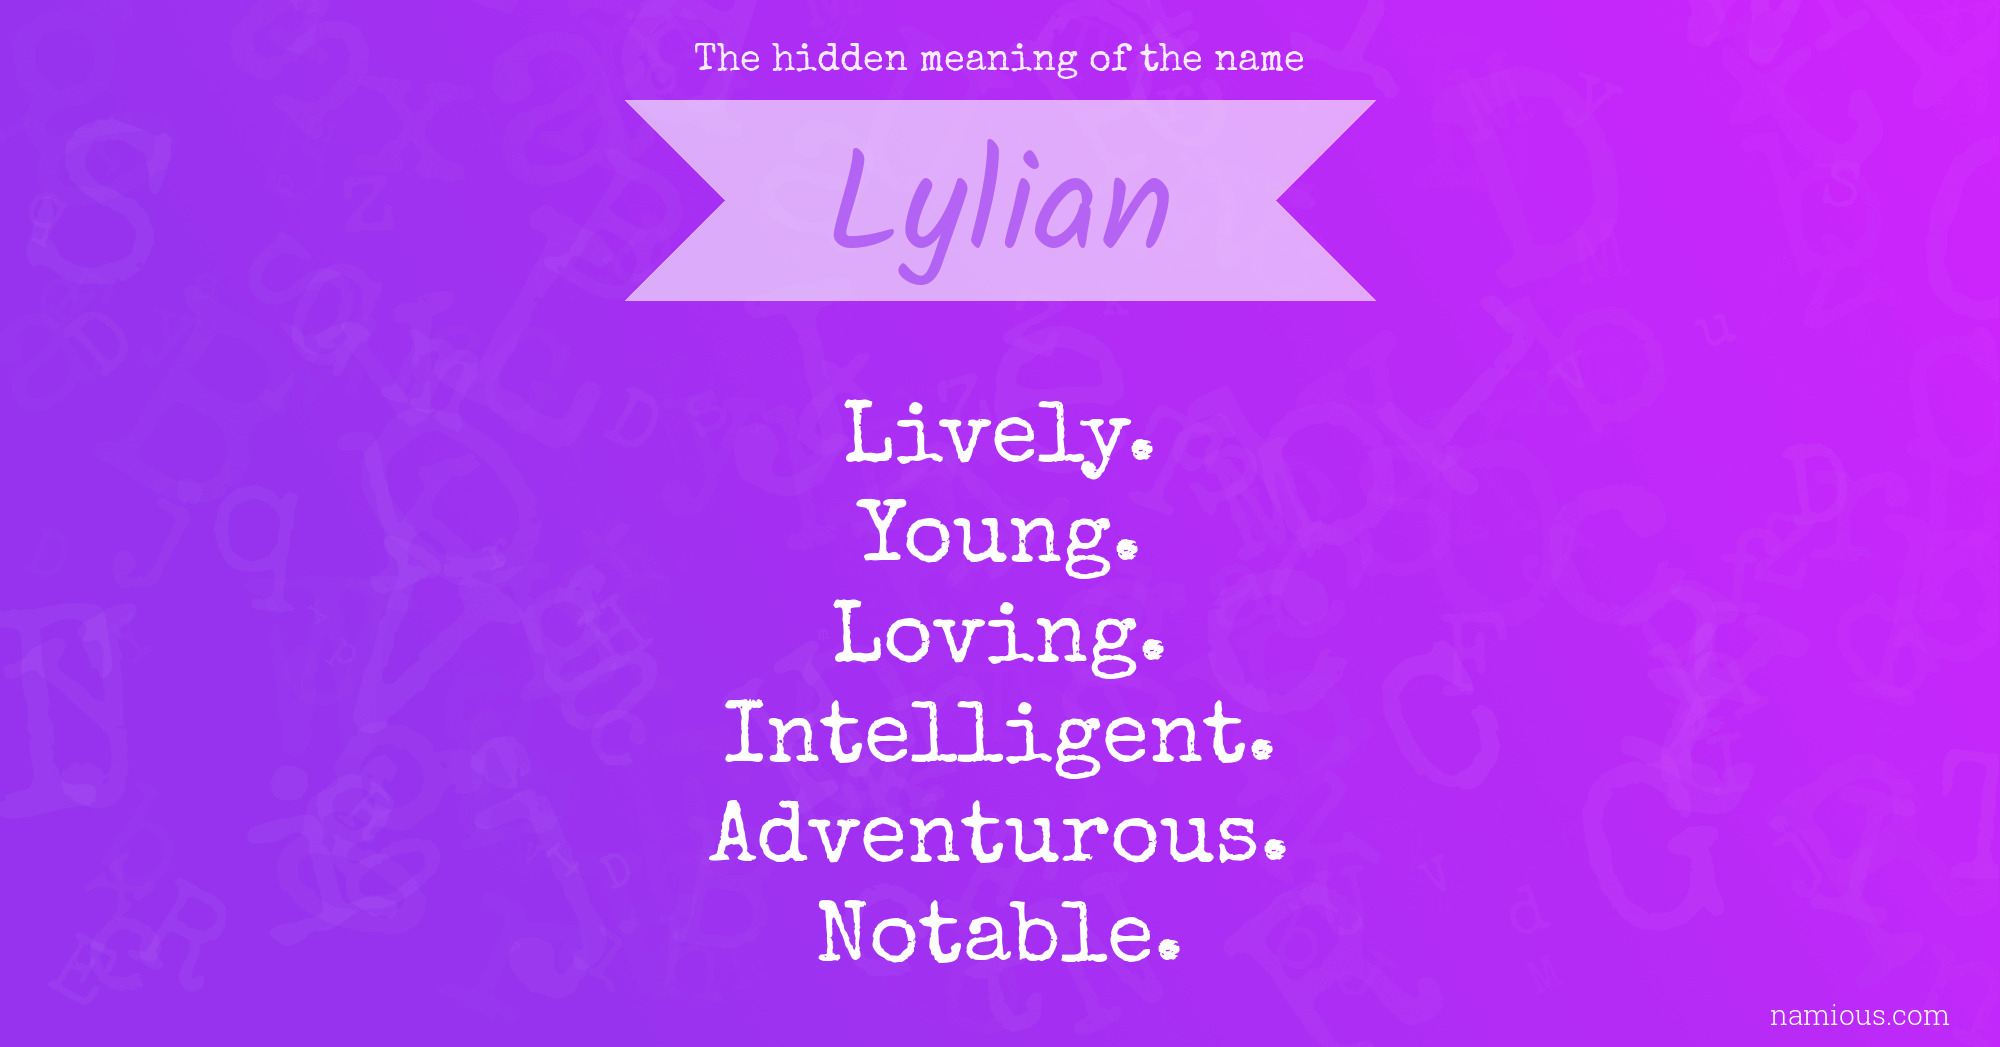 The hidden meaning of the name Lylian